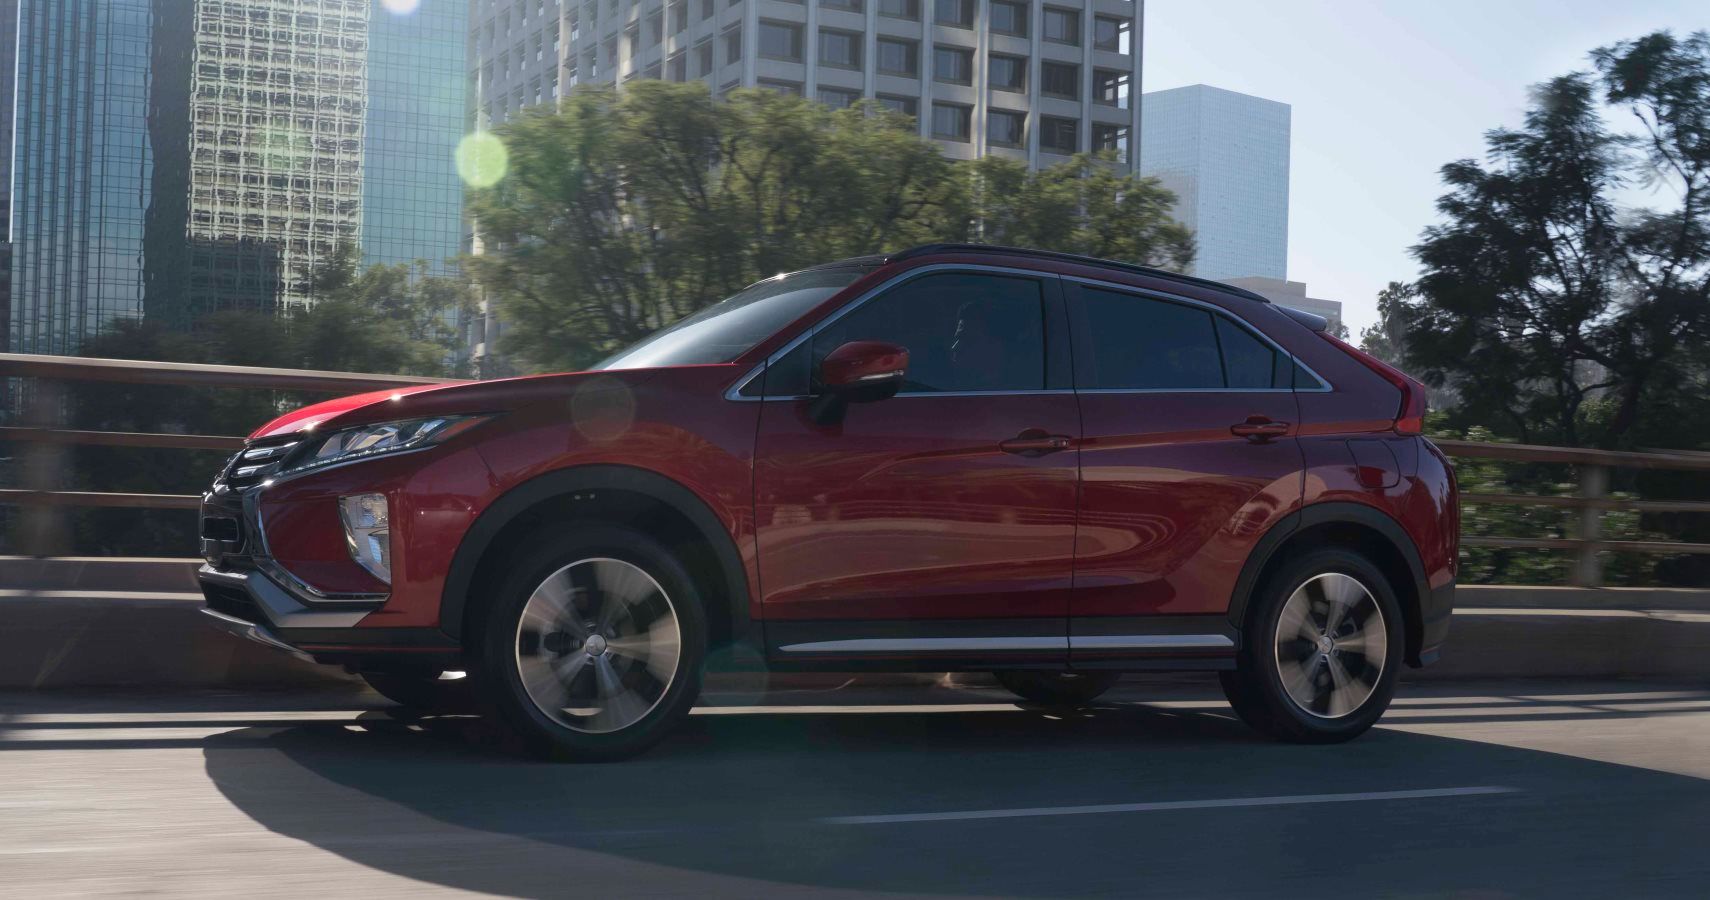 Review: 2019 Mitsubishi Eclipse Cross - A Crossover Like Any Other